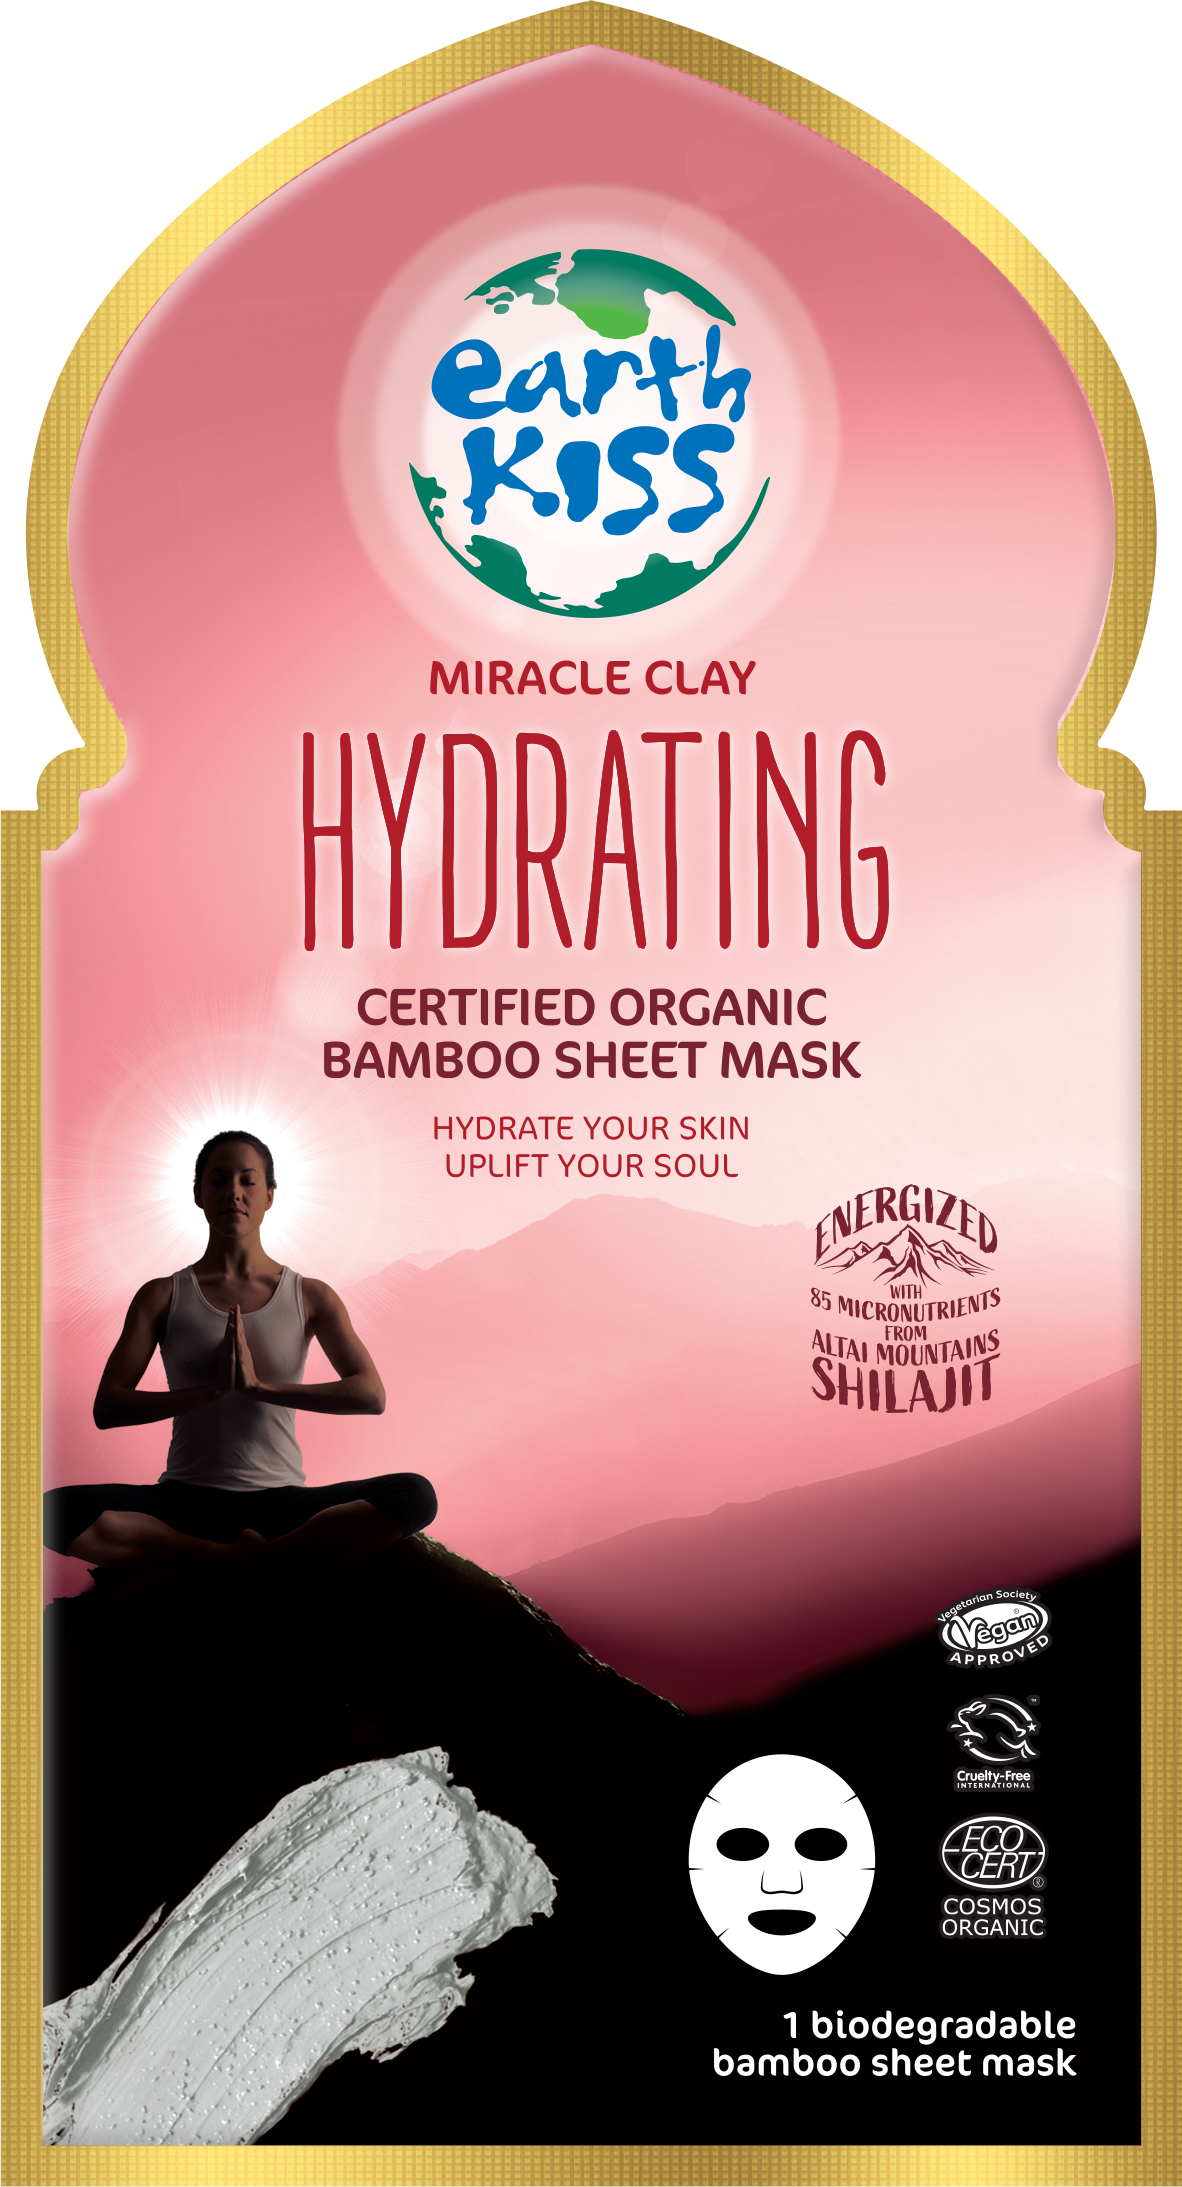 Earth Kiss Inspirations Hydrating Organic Bamboo Sheet Mask with Shilajit and Miracle Clay to Hydrate Your Skin